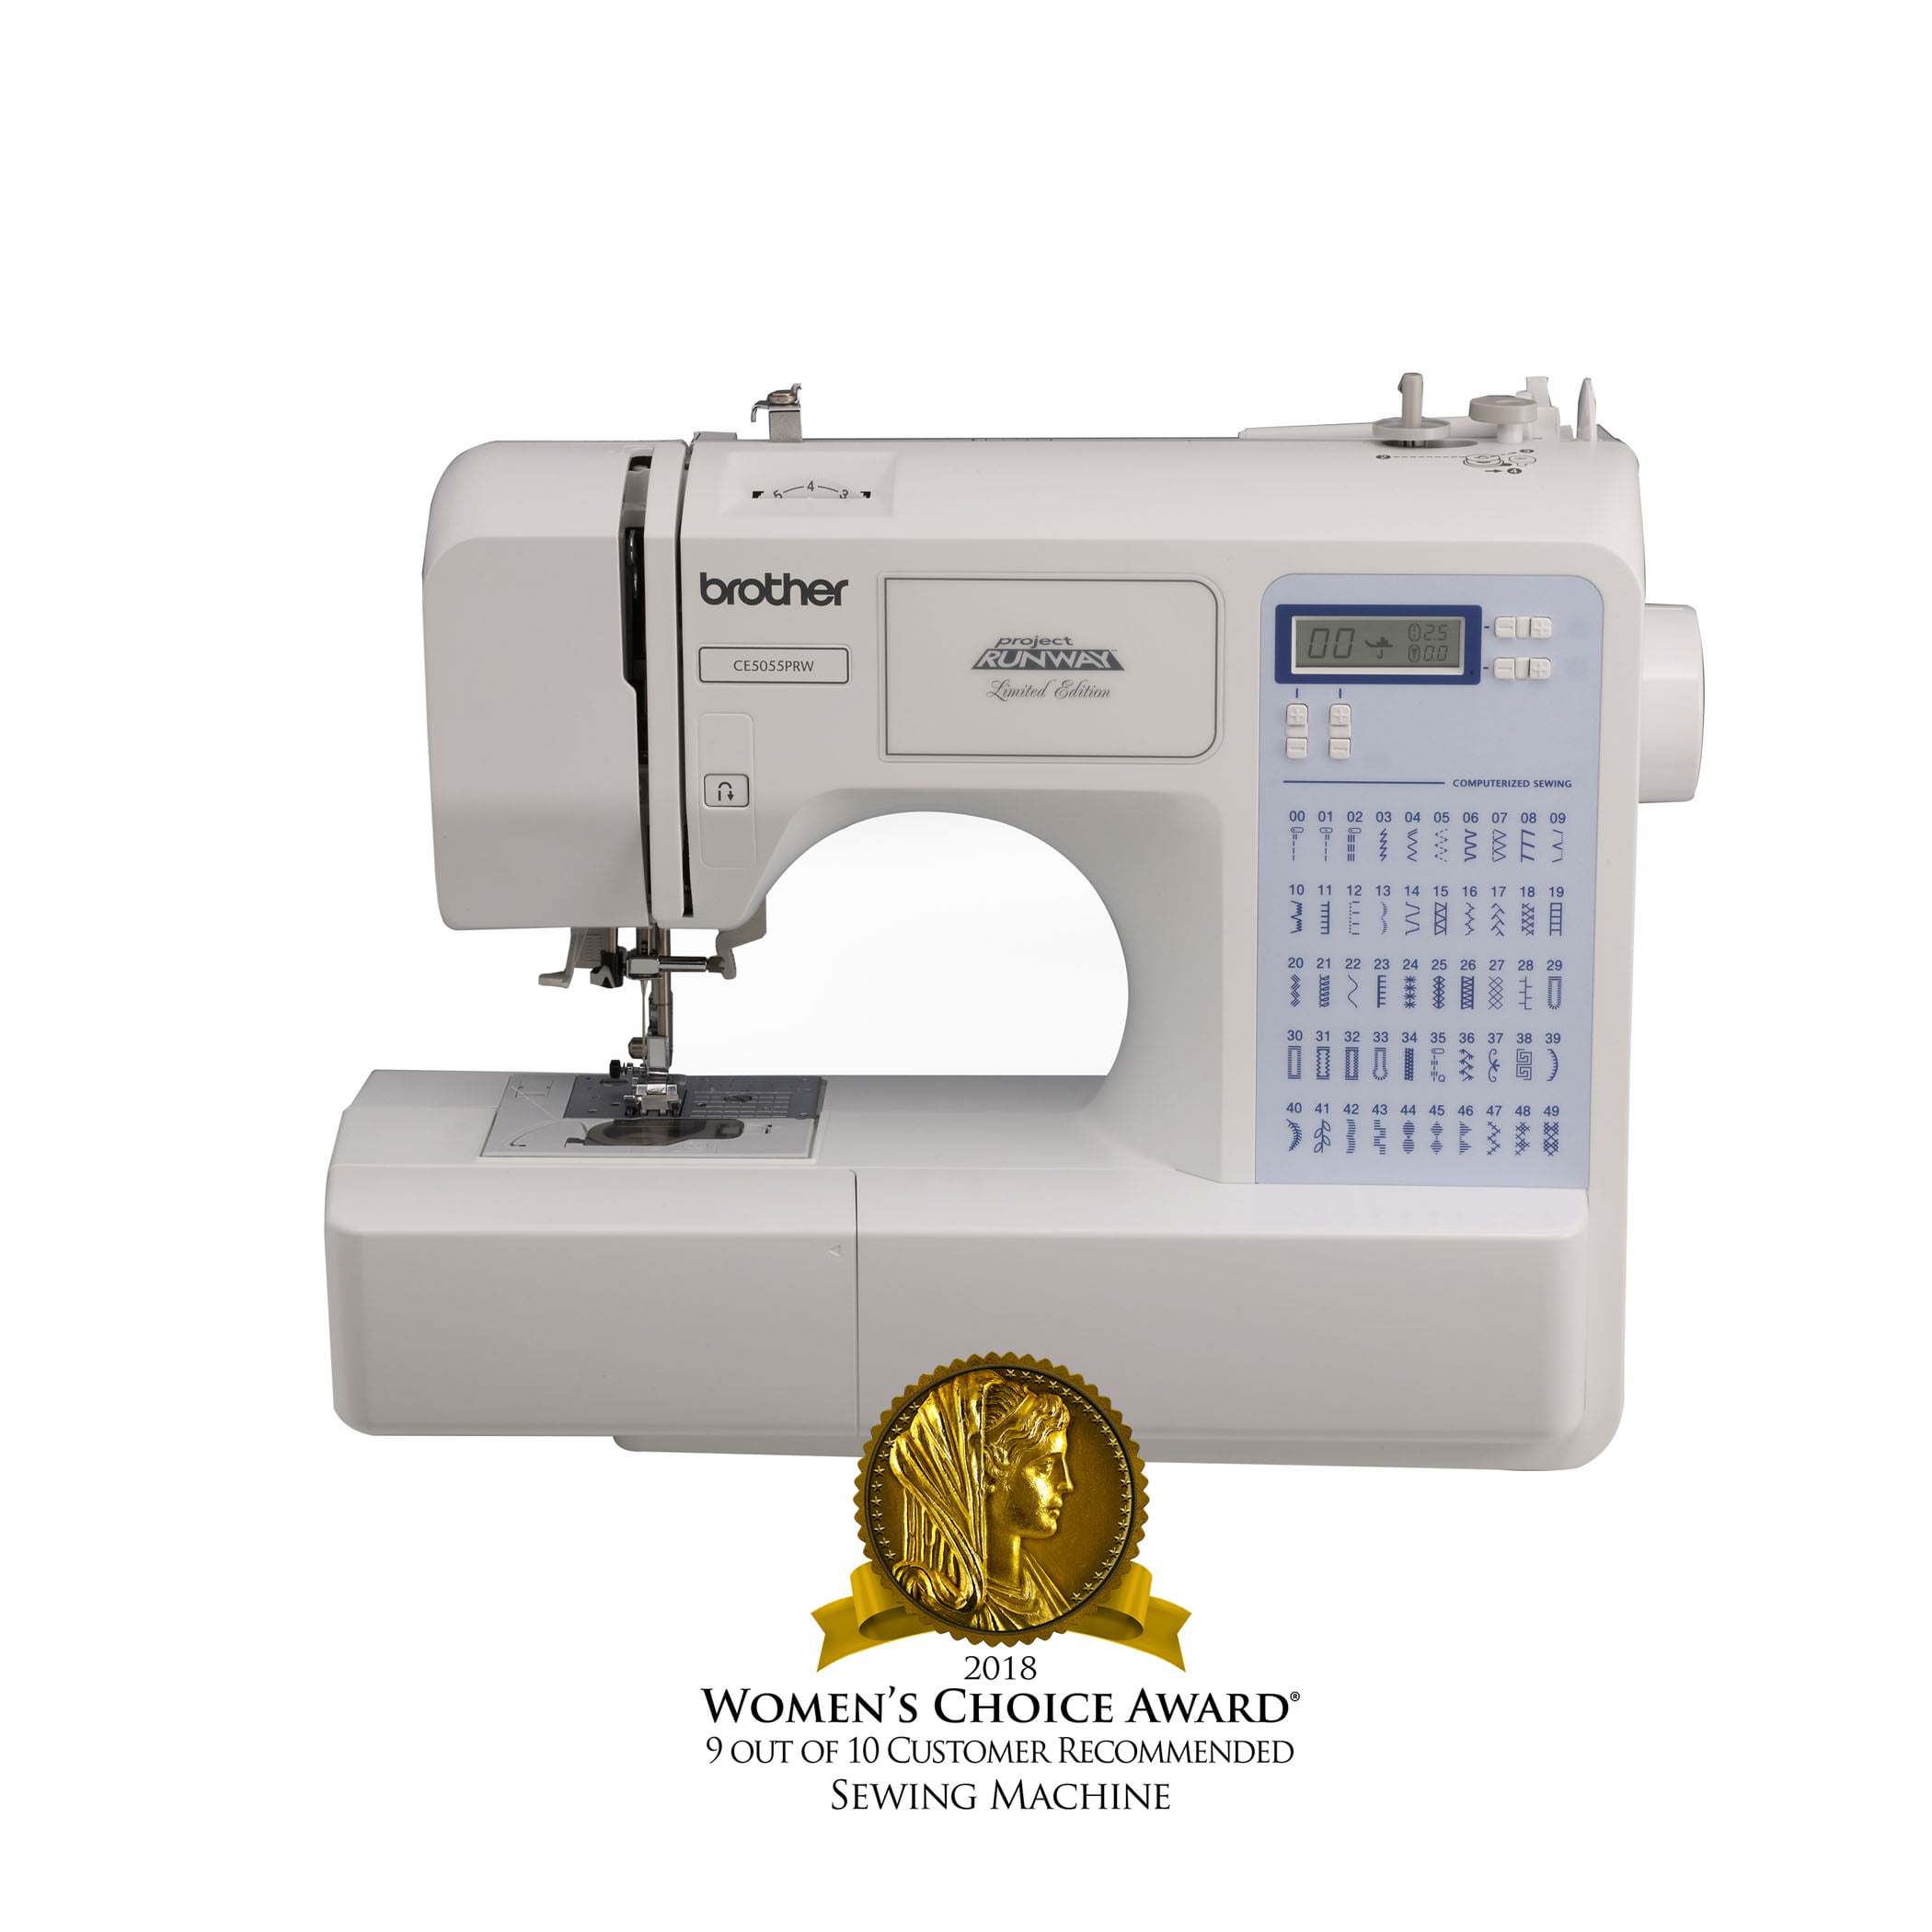 not load error code on swf embroidery machine